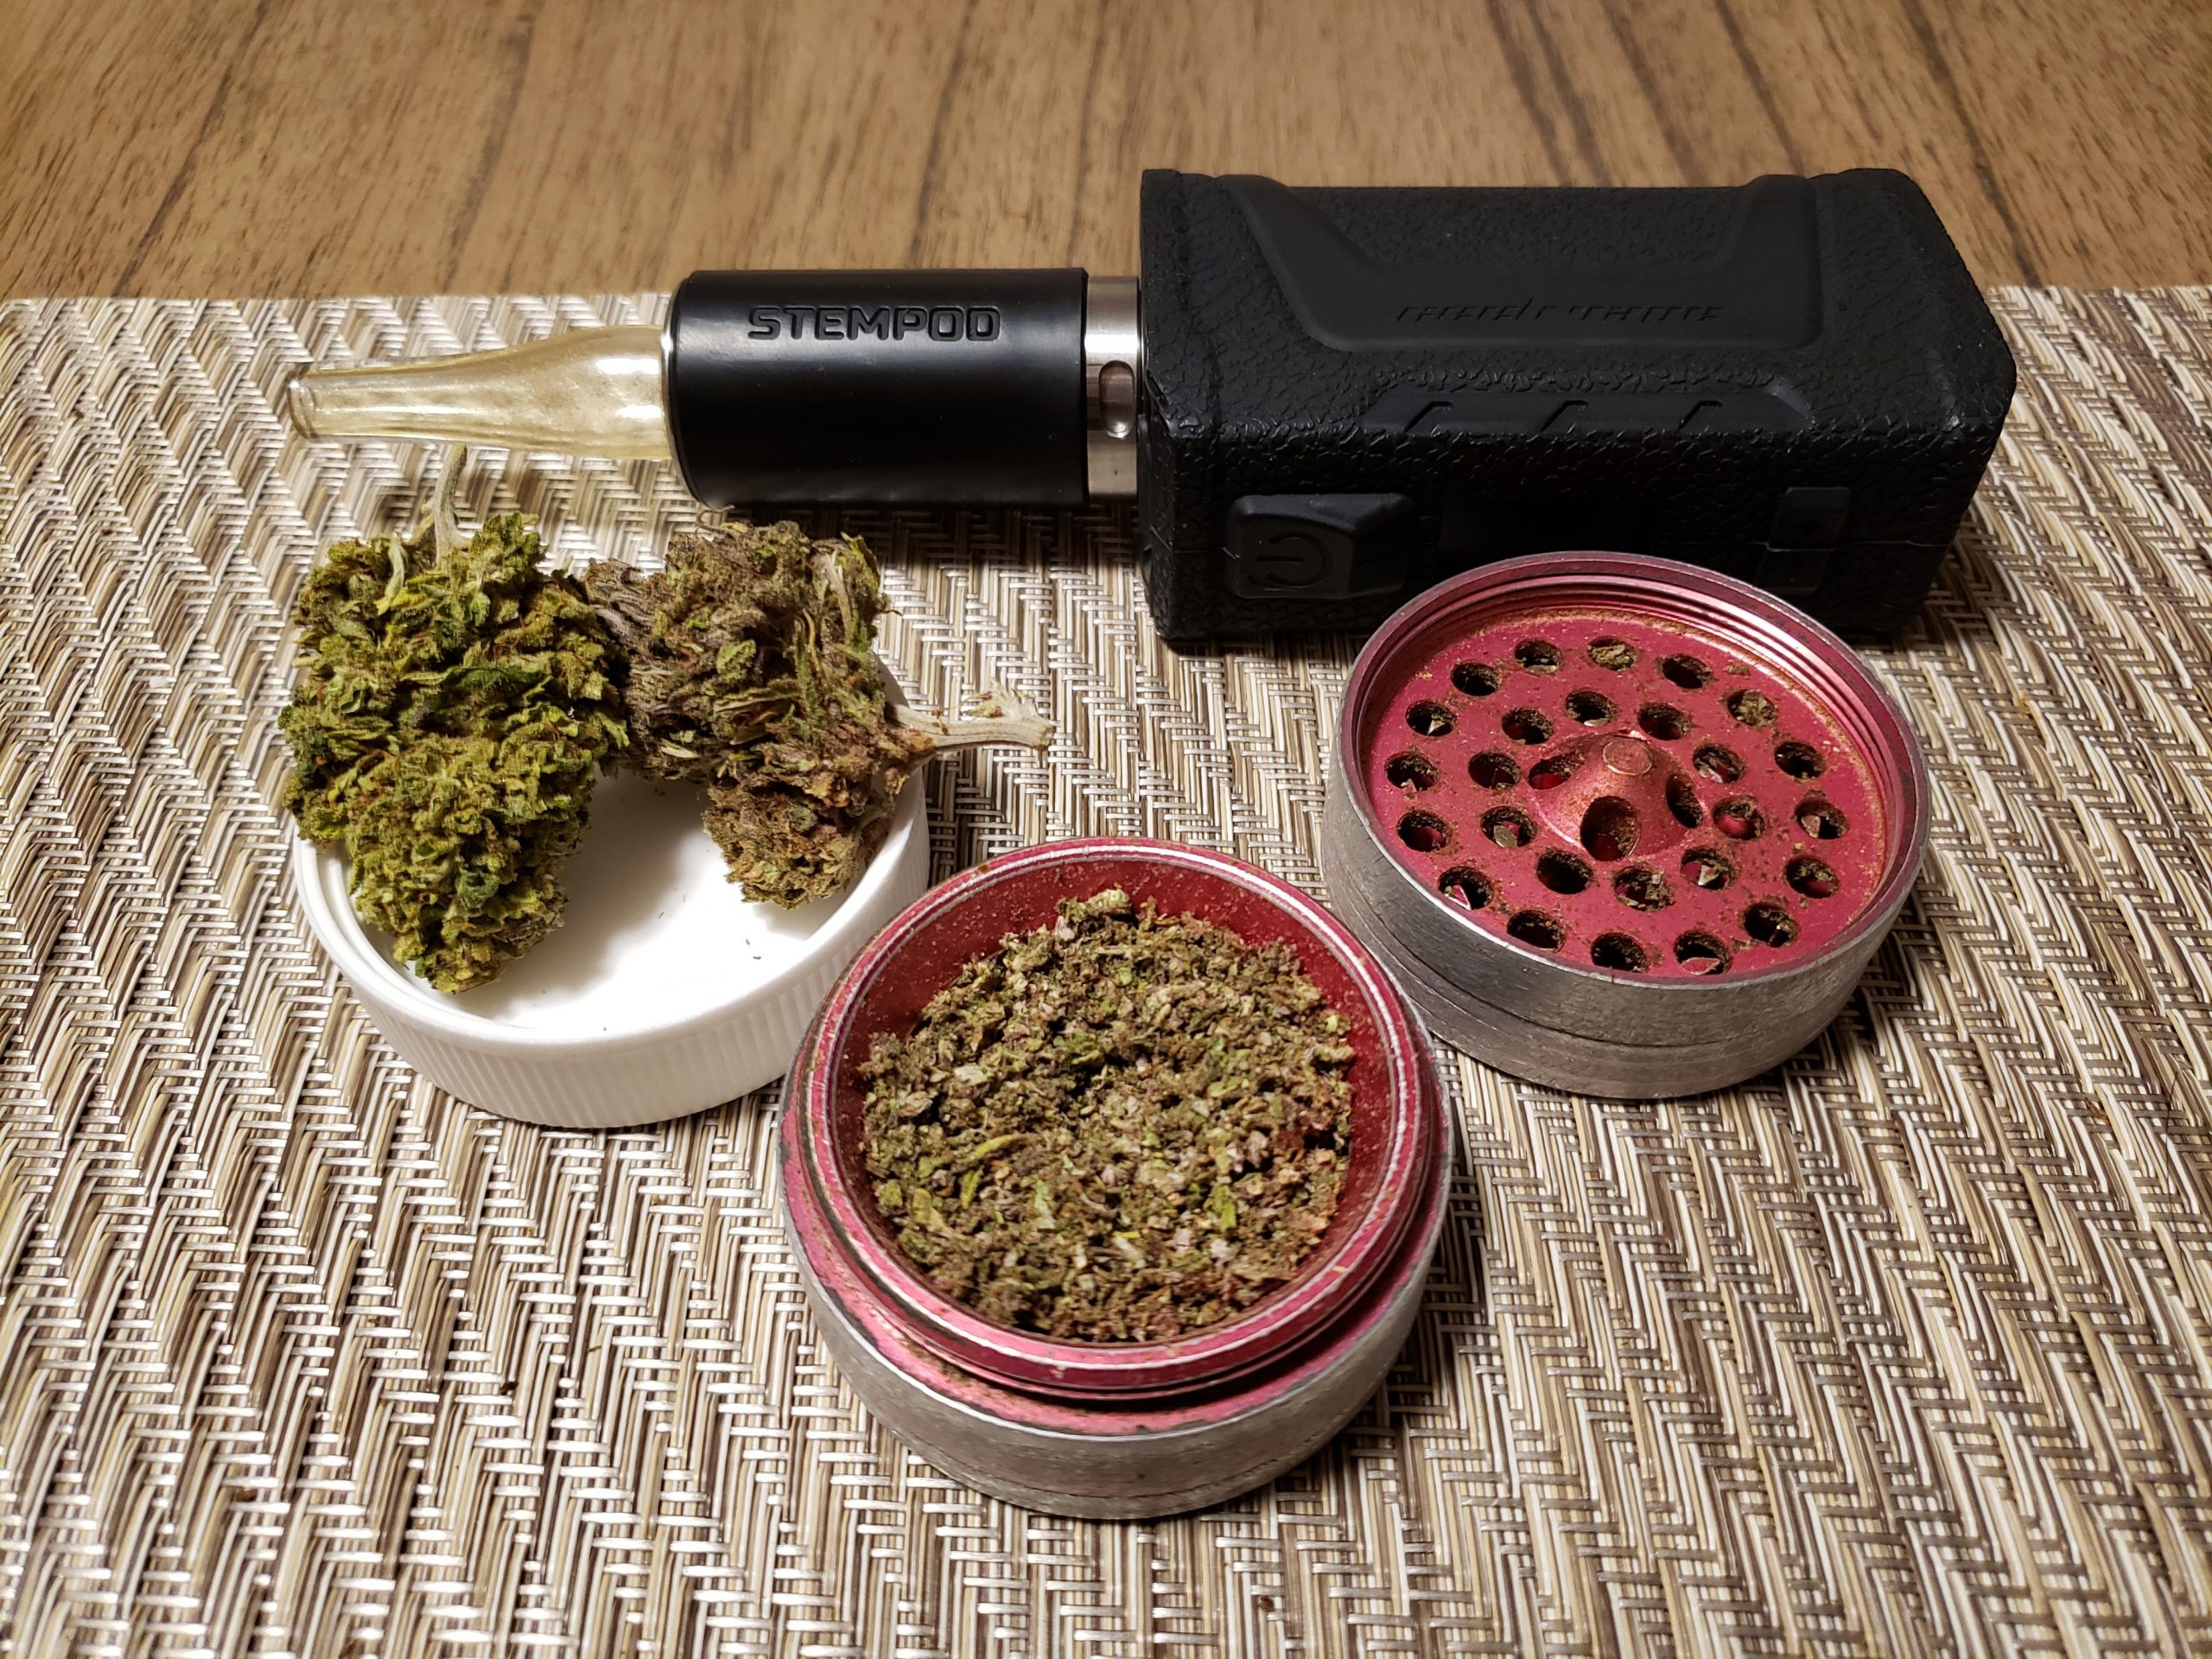 How To Vape CBD Flower For The Greatest Benefit